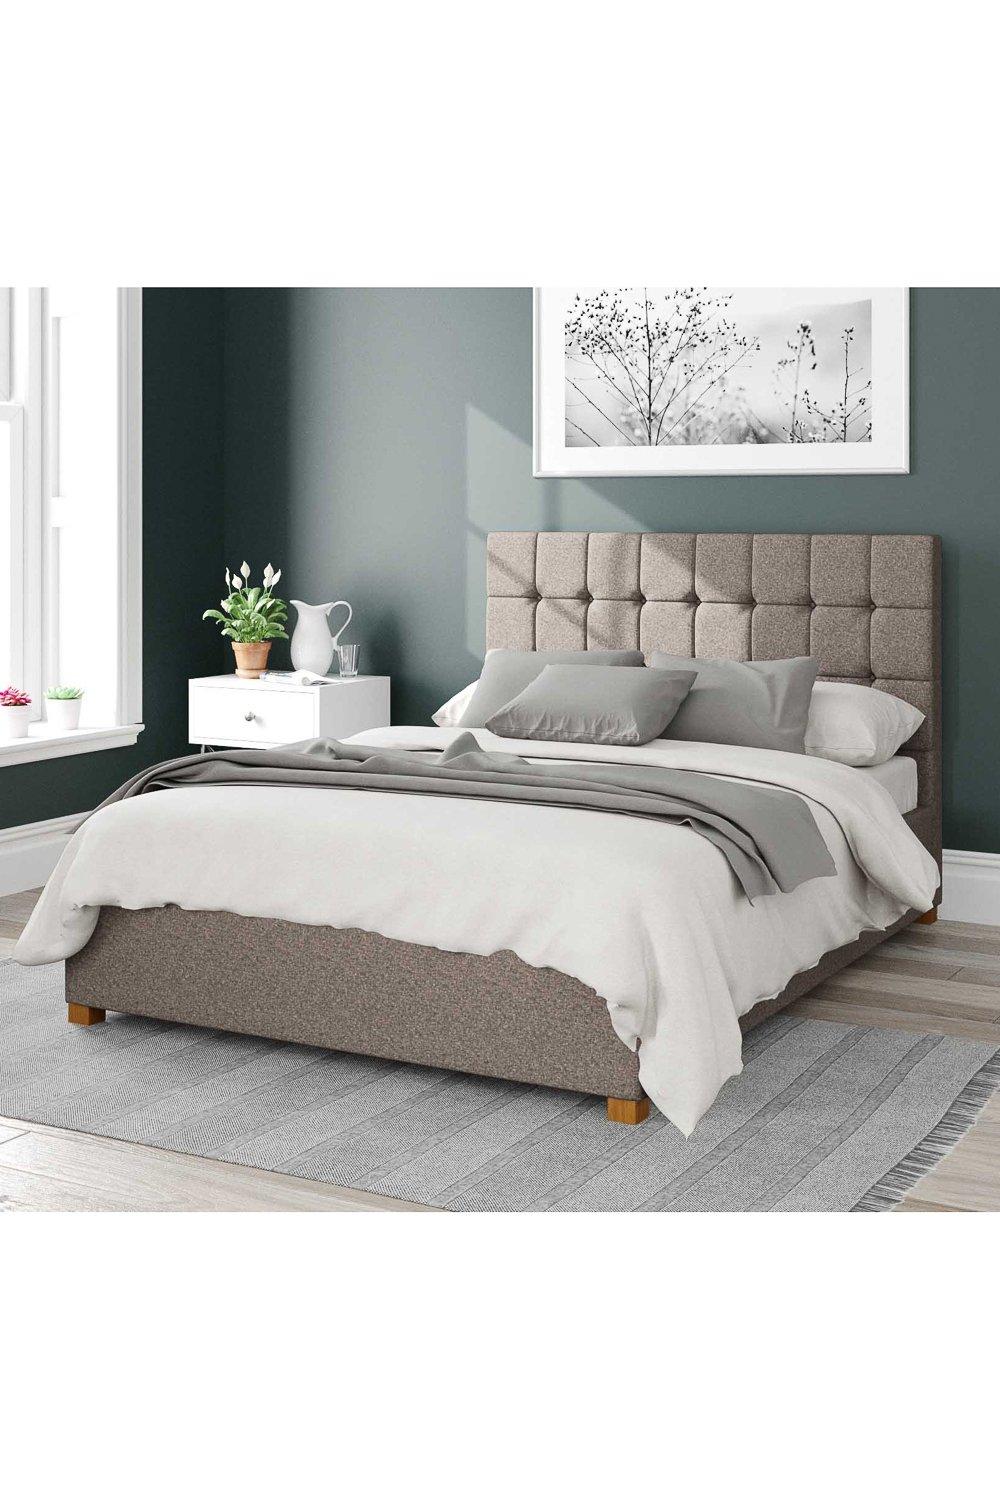 Sinatra Upholstered Ottoman Storage Bed, Yorkshire Knit Fabric